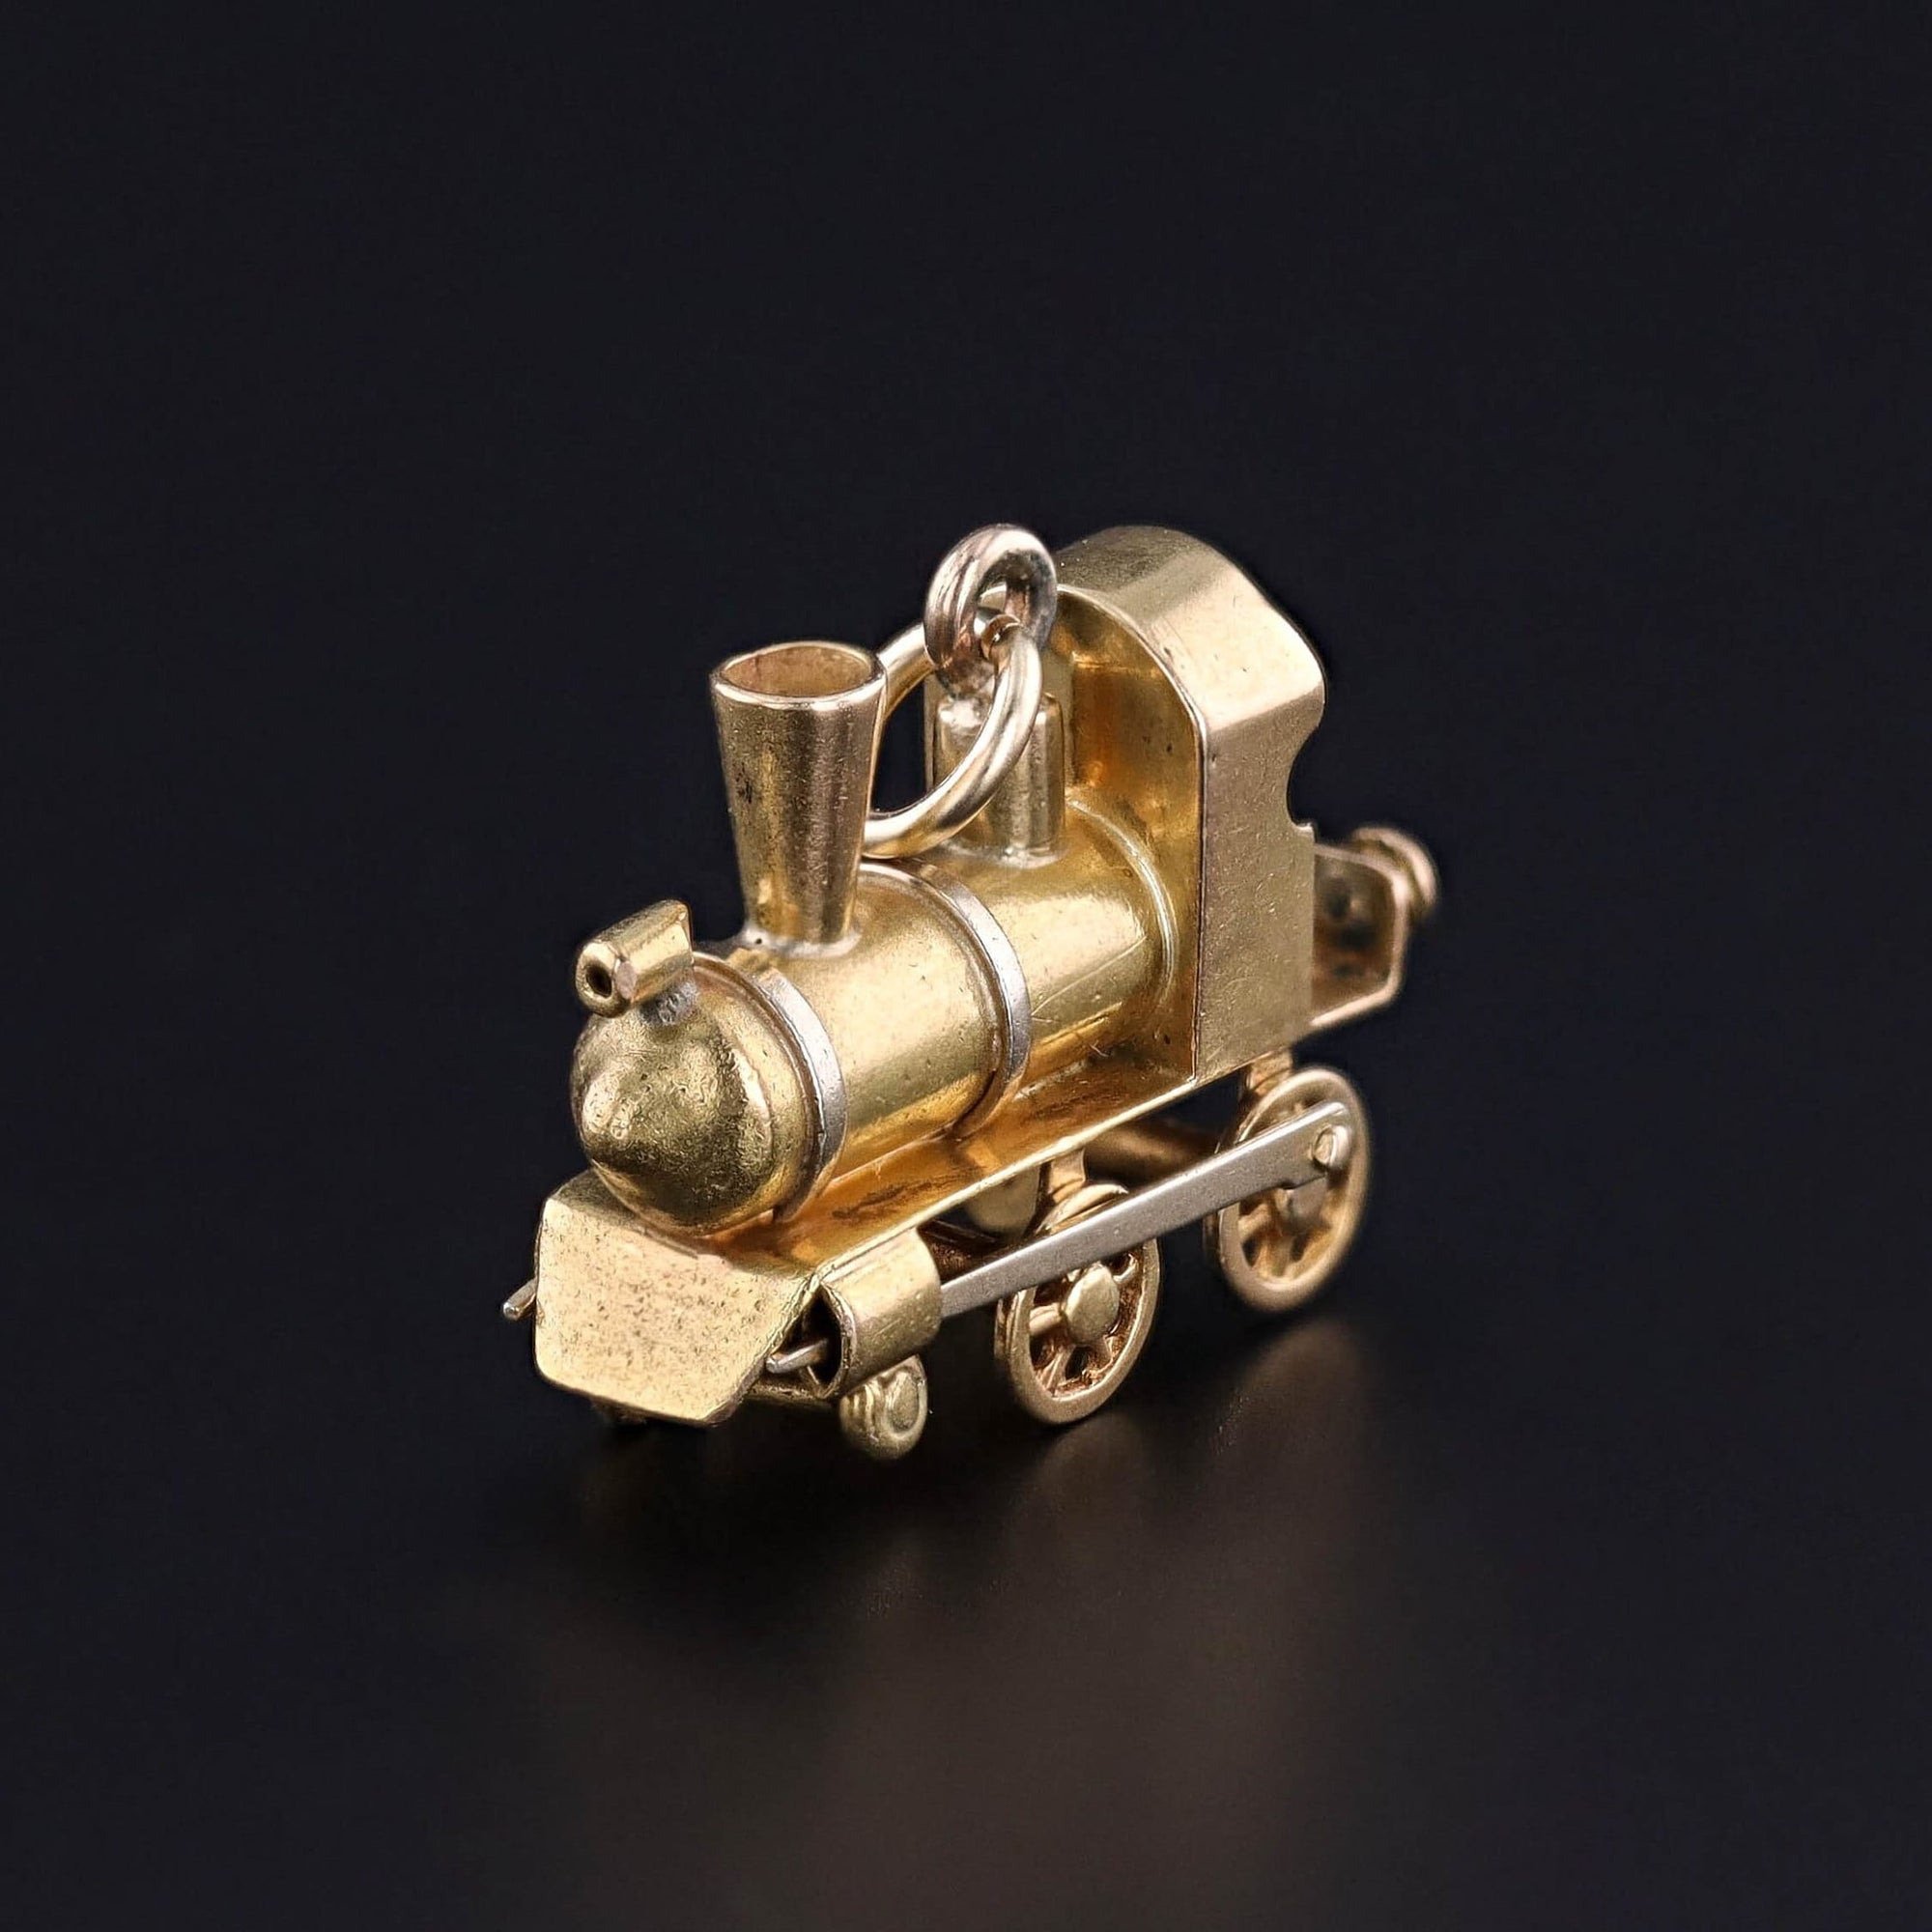 Vintage Moveable Train Engine Charm of 18k Gold